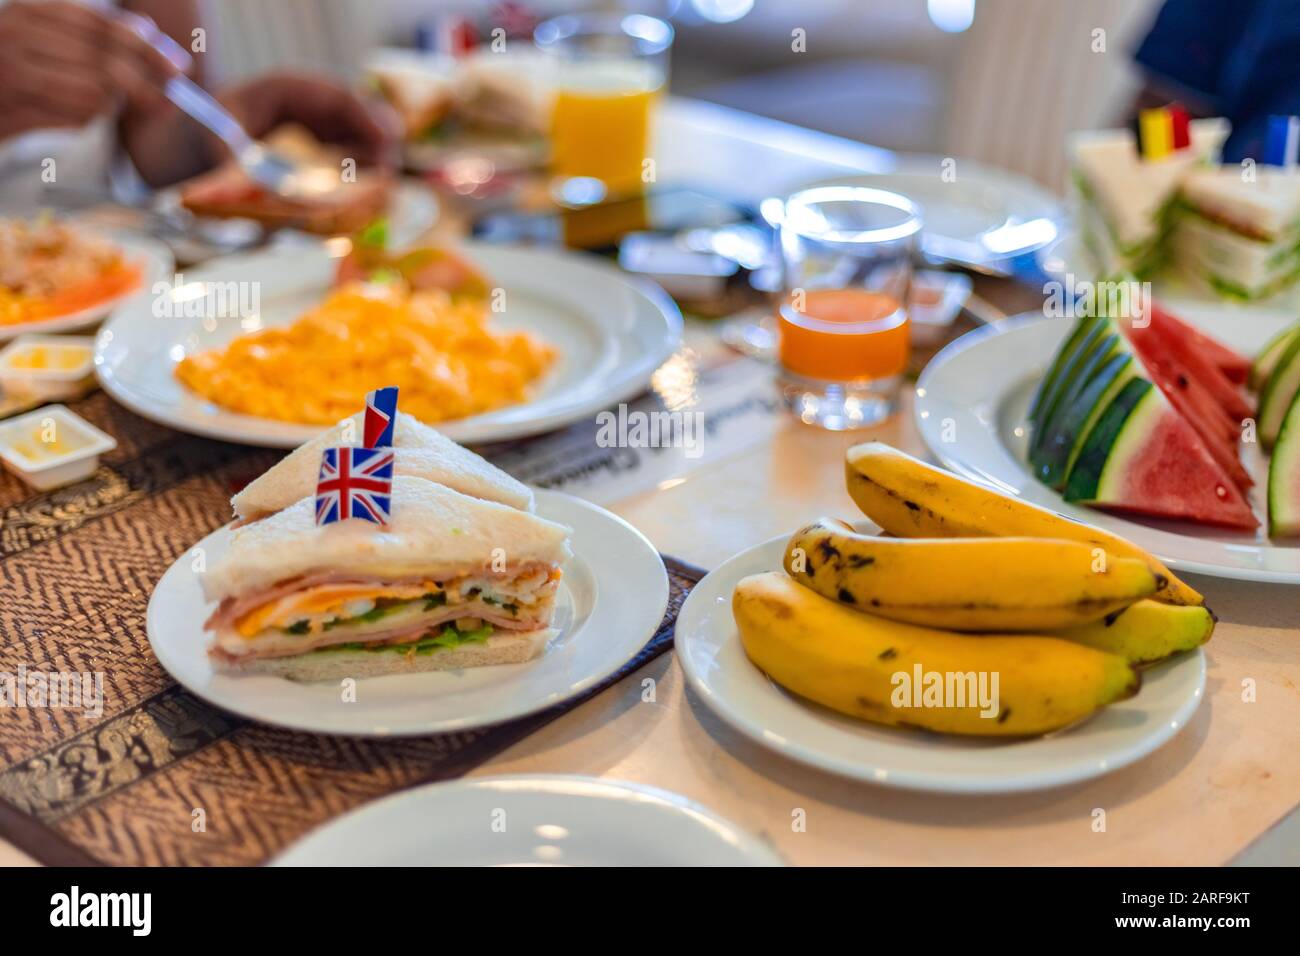 Healthy Breakfast Concept. Club Sandwich presented with English Flag on top along with fruits and juice at breakfast table. Stock Photo